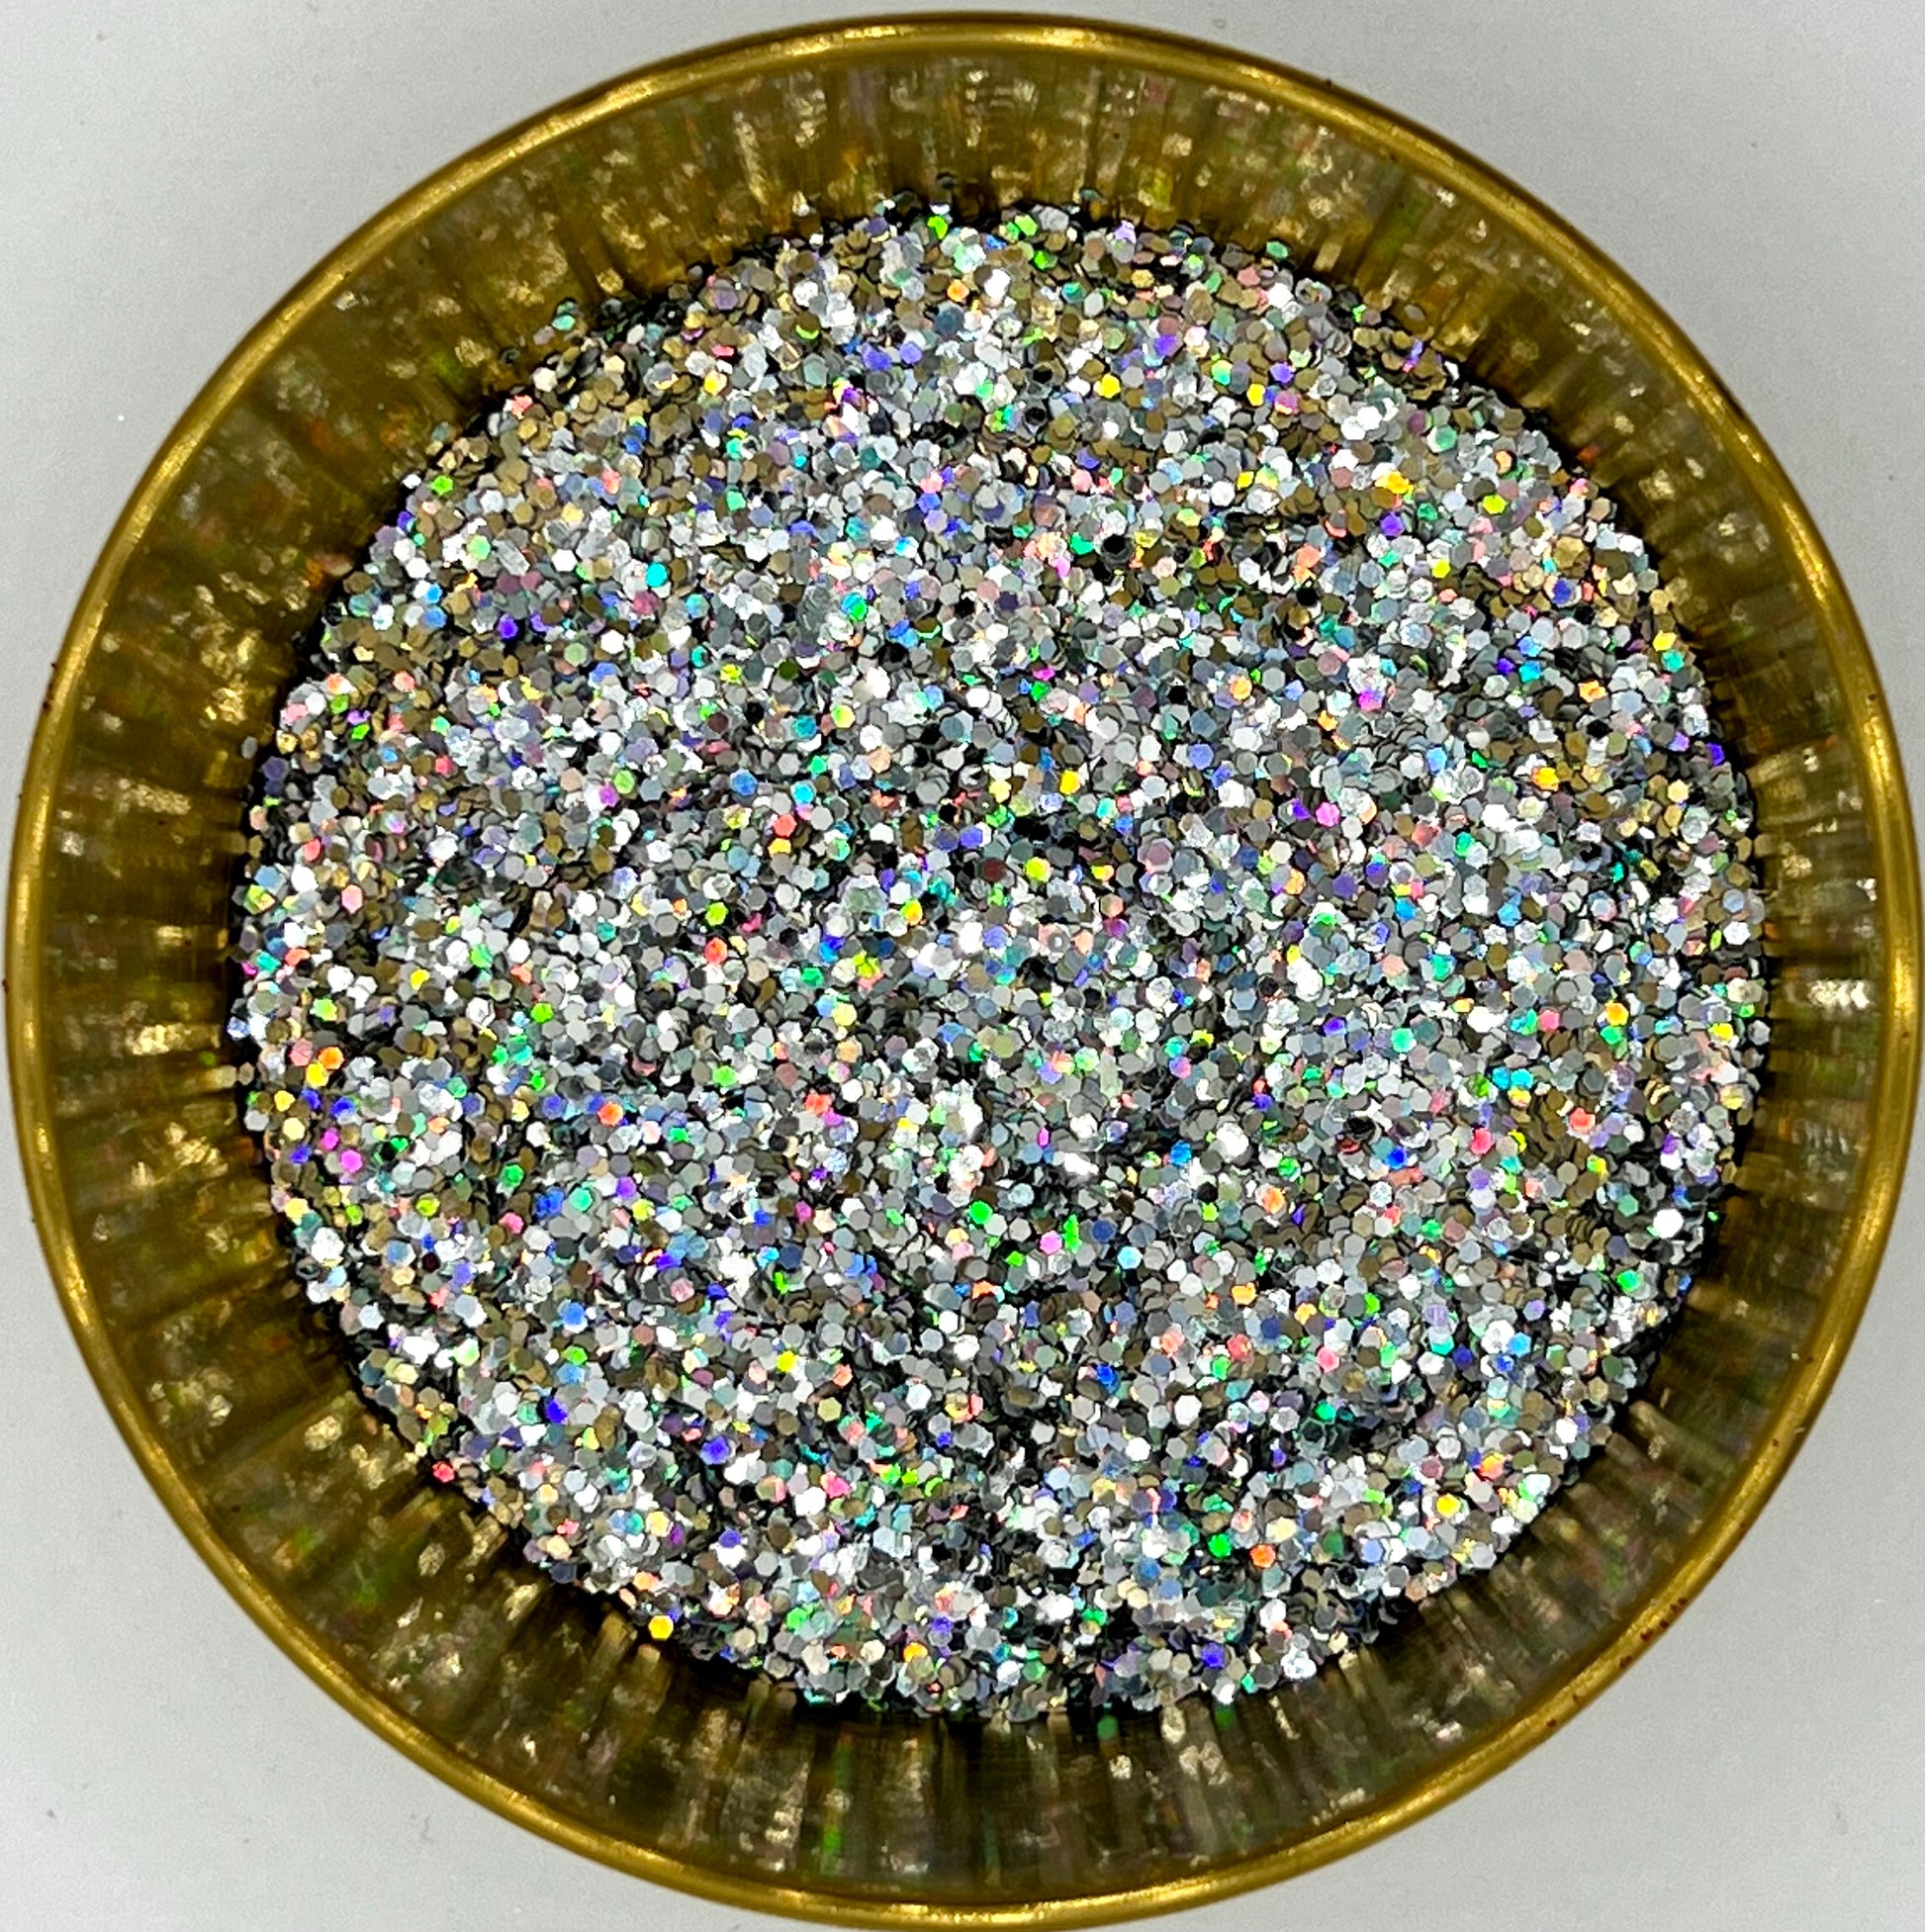 Holographic Silver Biodegradable Glitter